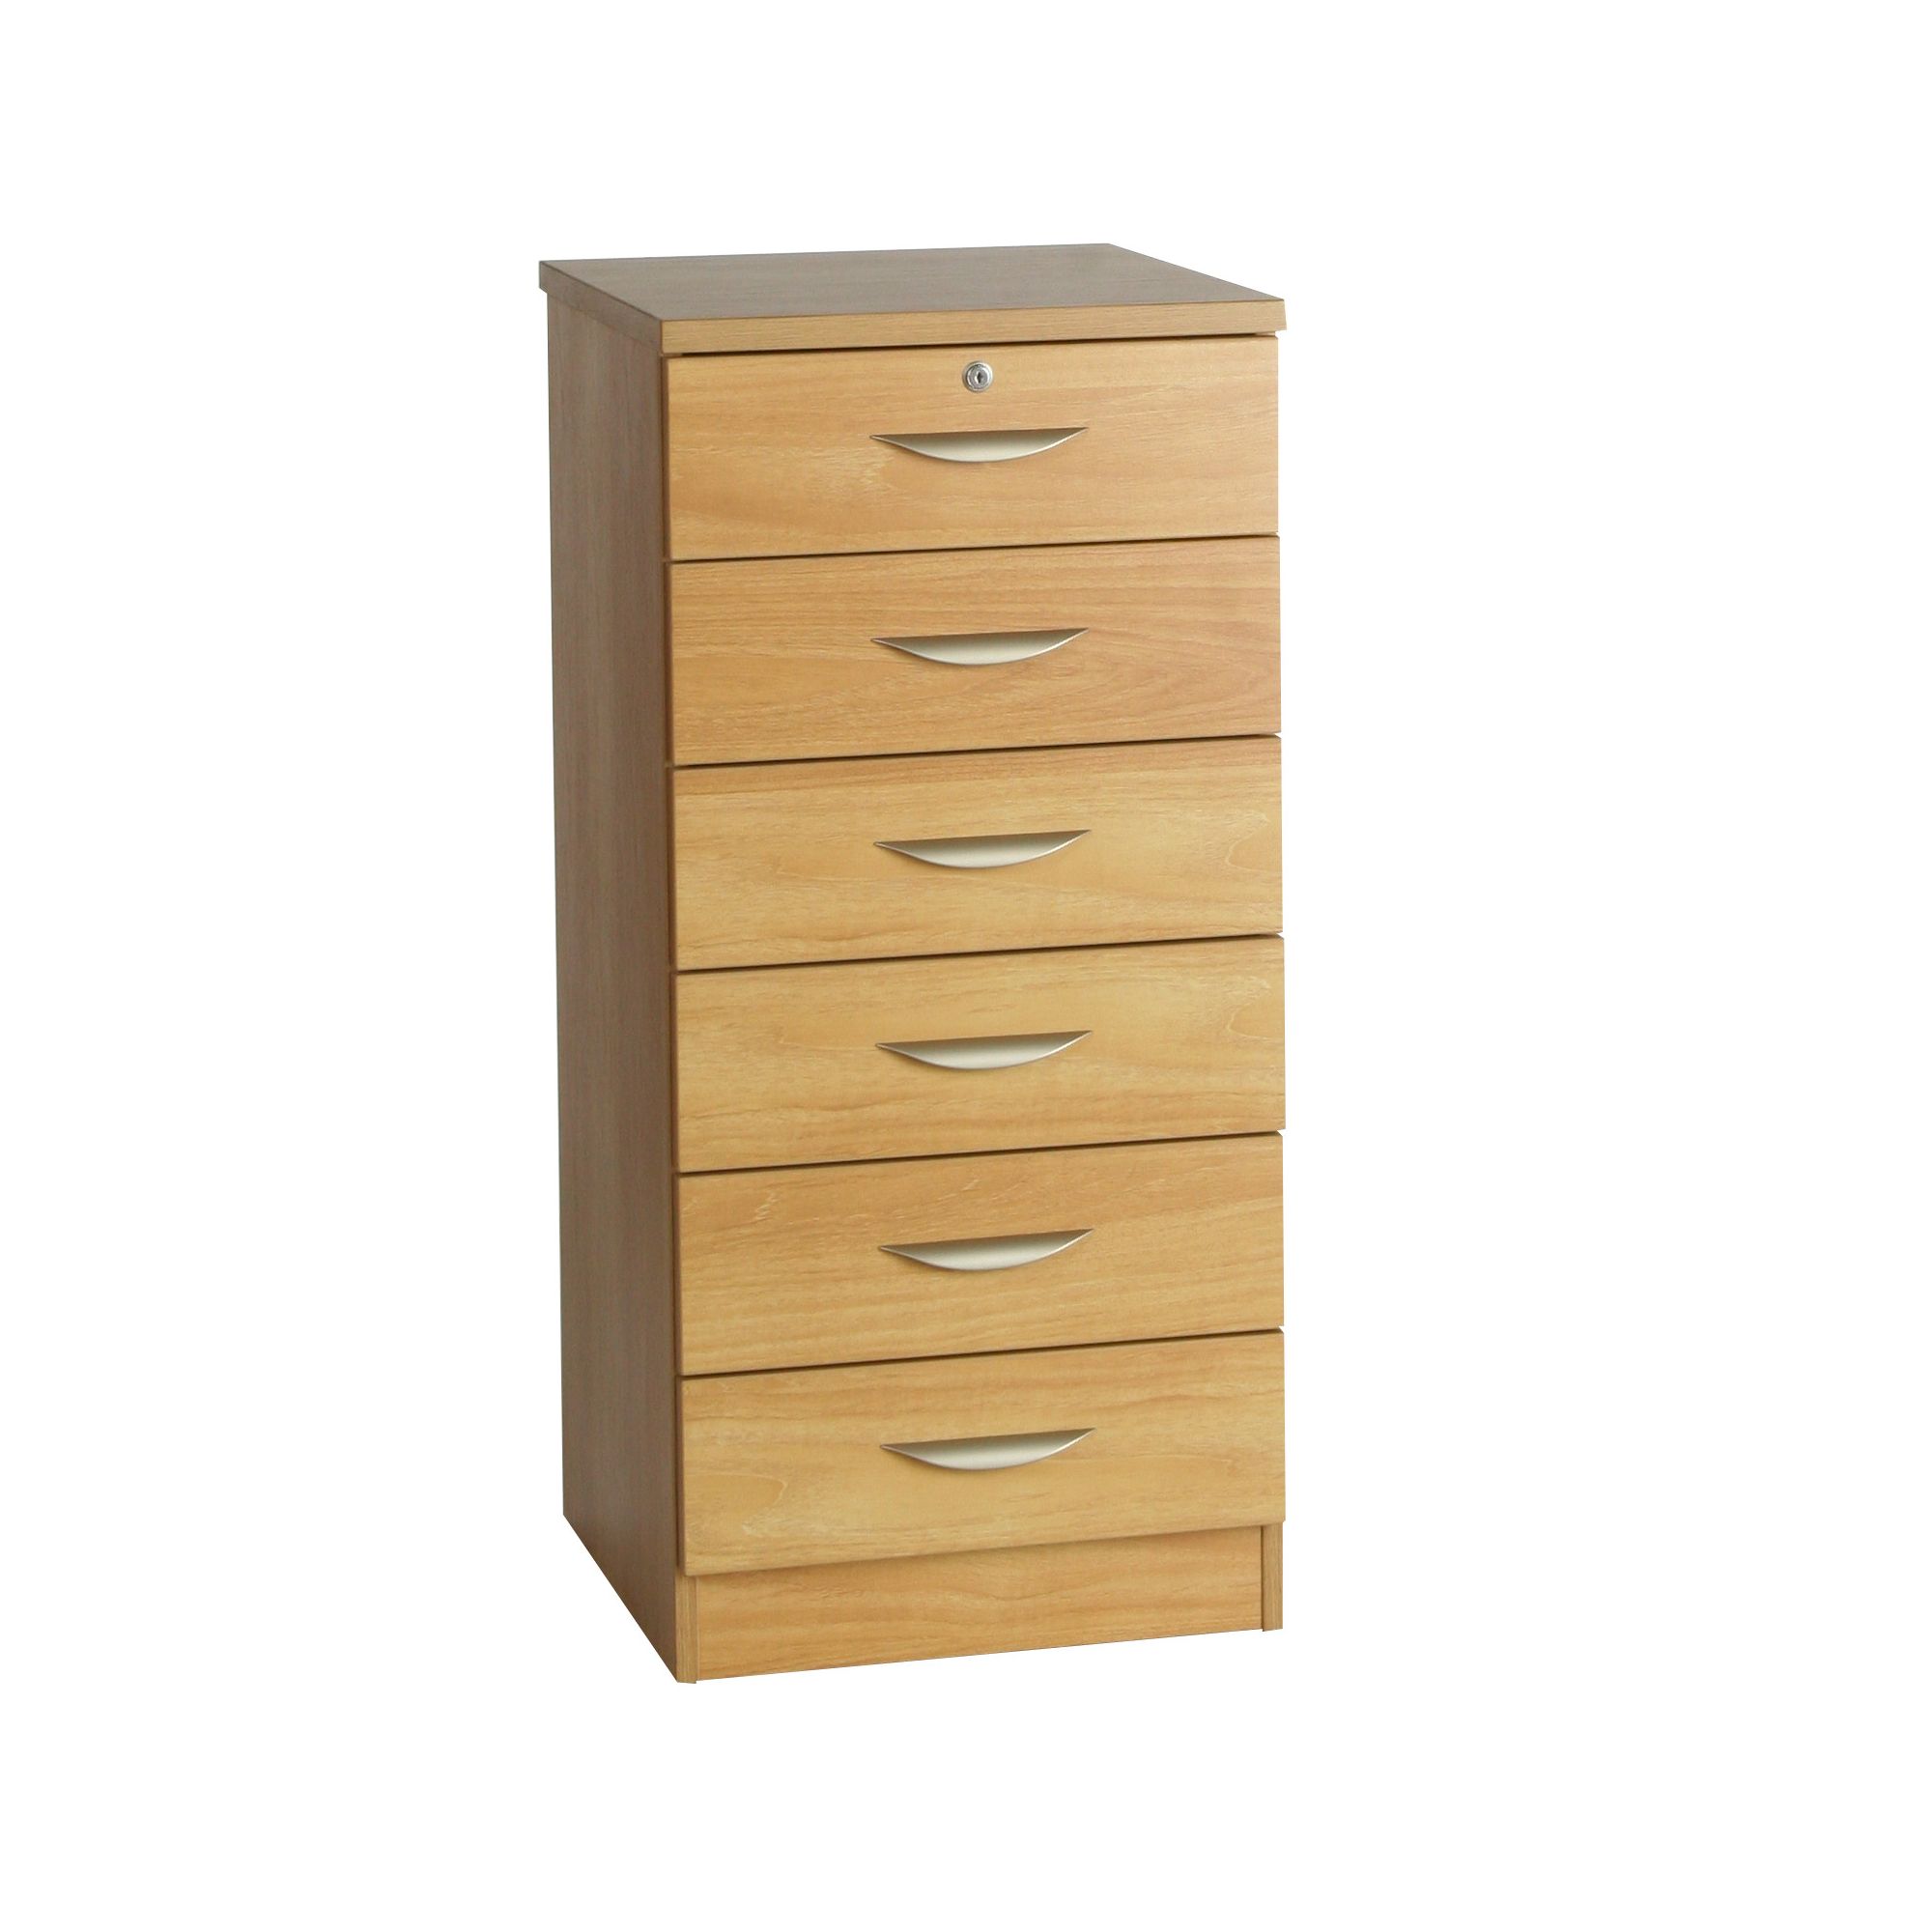 R White Cabinets Six Drawer Wooden Home Office Unit - Walnut at Tesco Direct